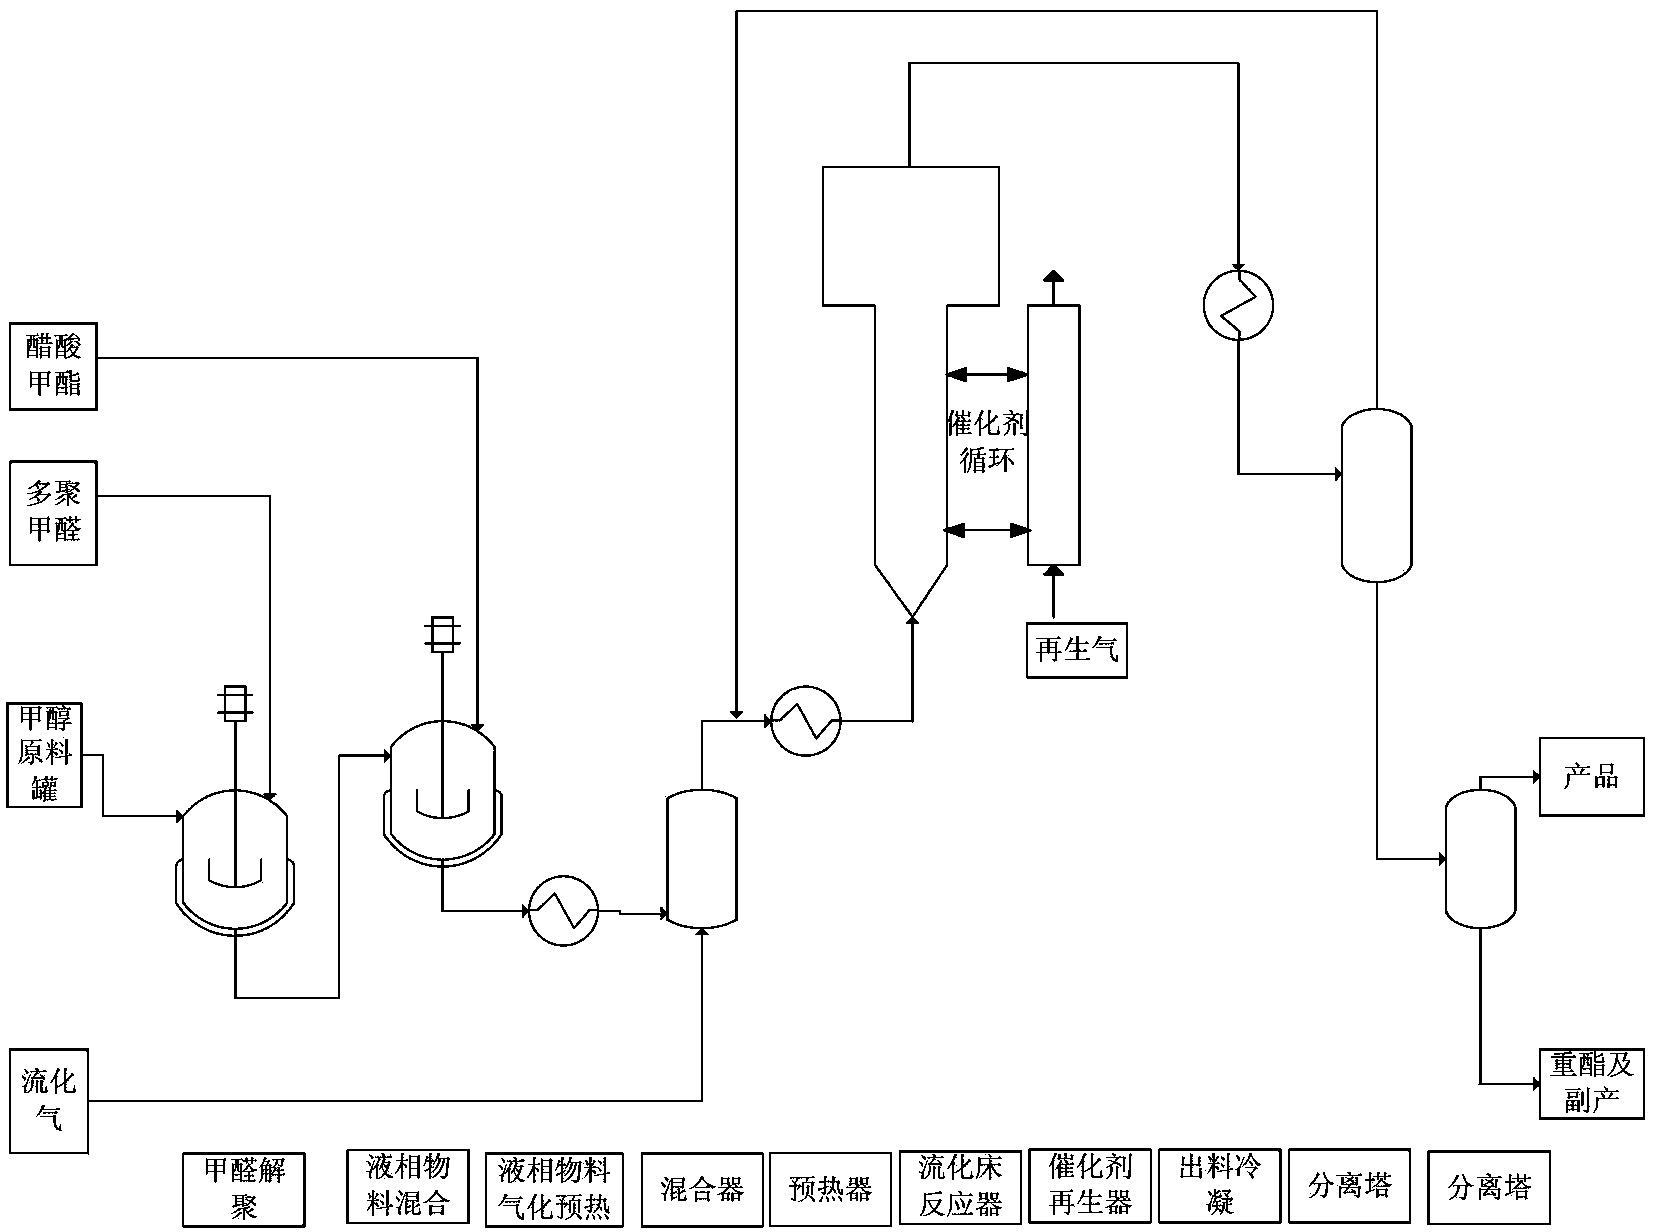 Synthesis method for methyl acrylate from methyl acetate and formaldehyde